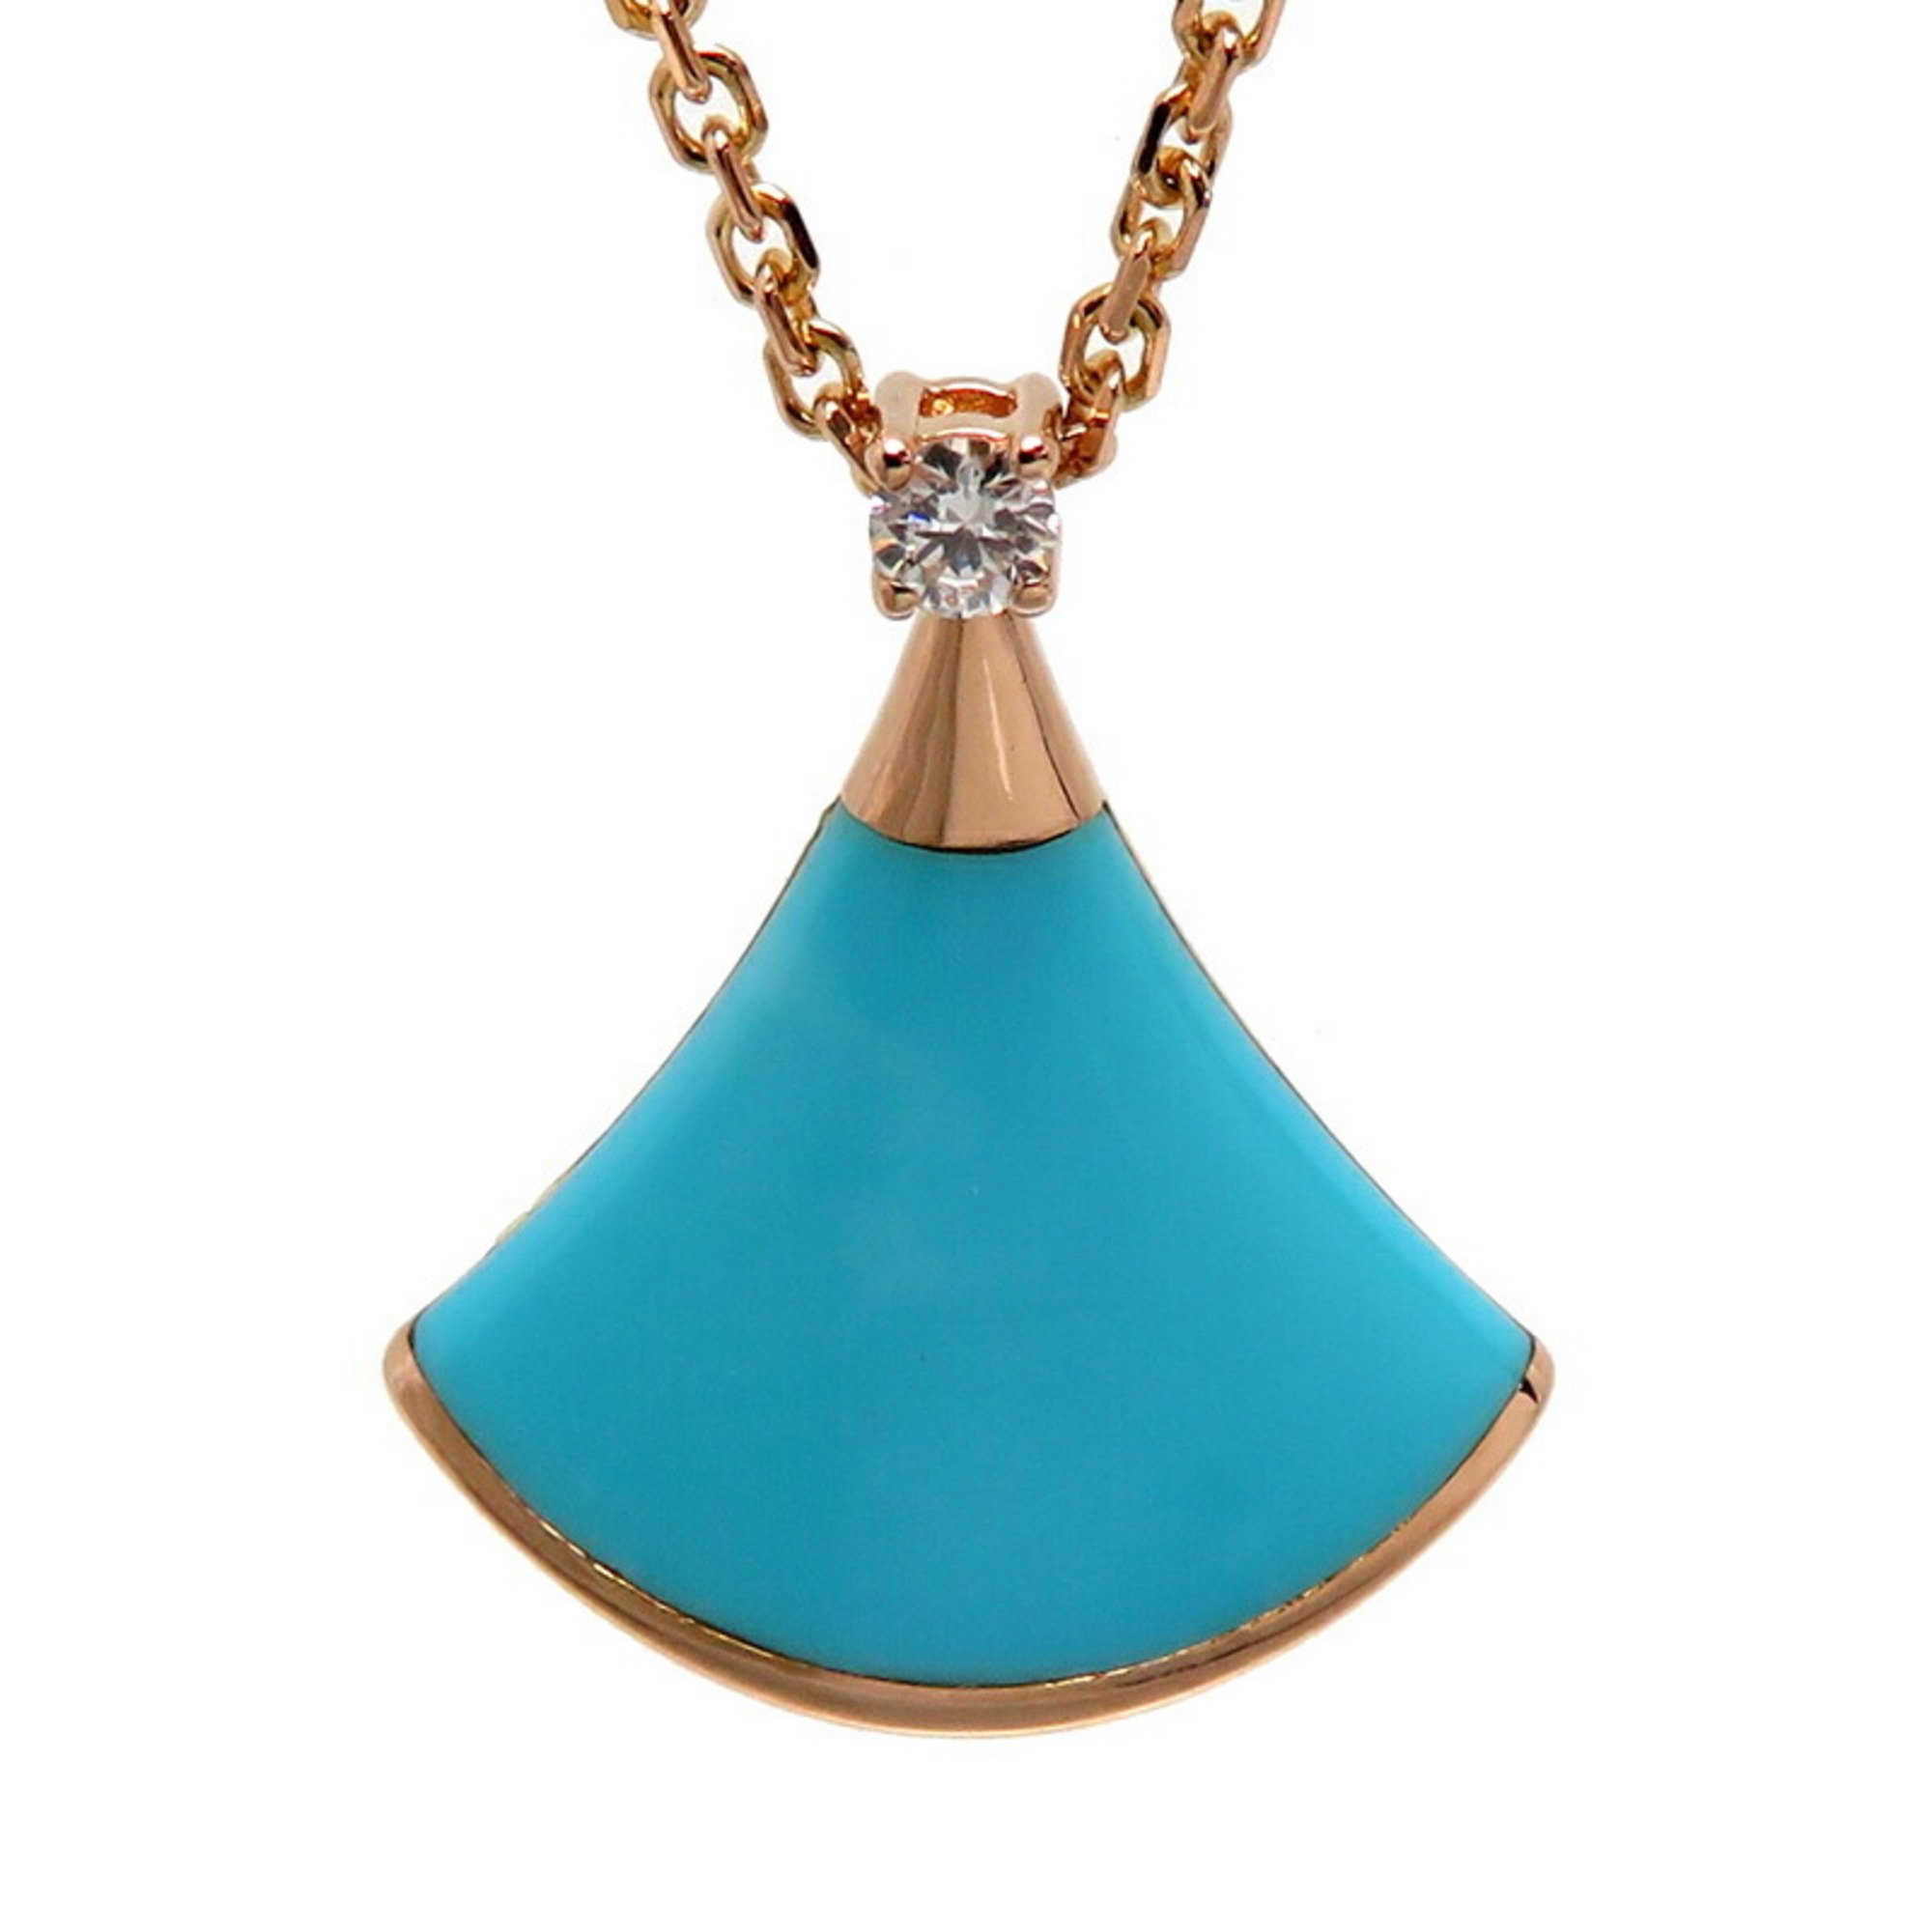 Bvlgari 750PG Diva Dream Turquoise Women's Necklace 750 Pink Gold